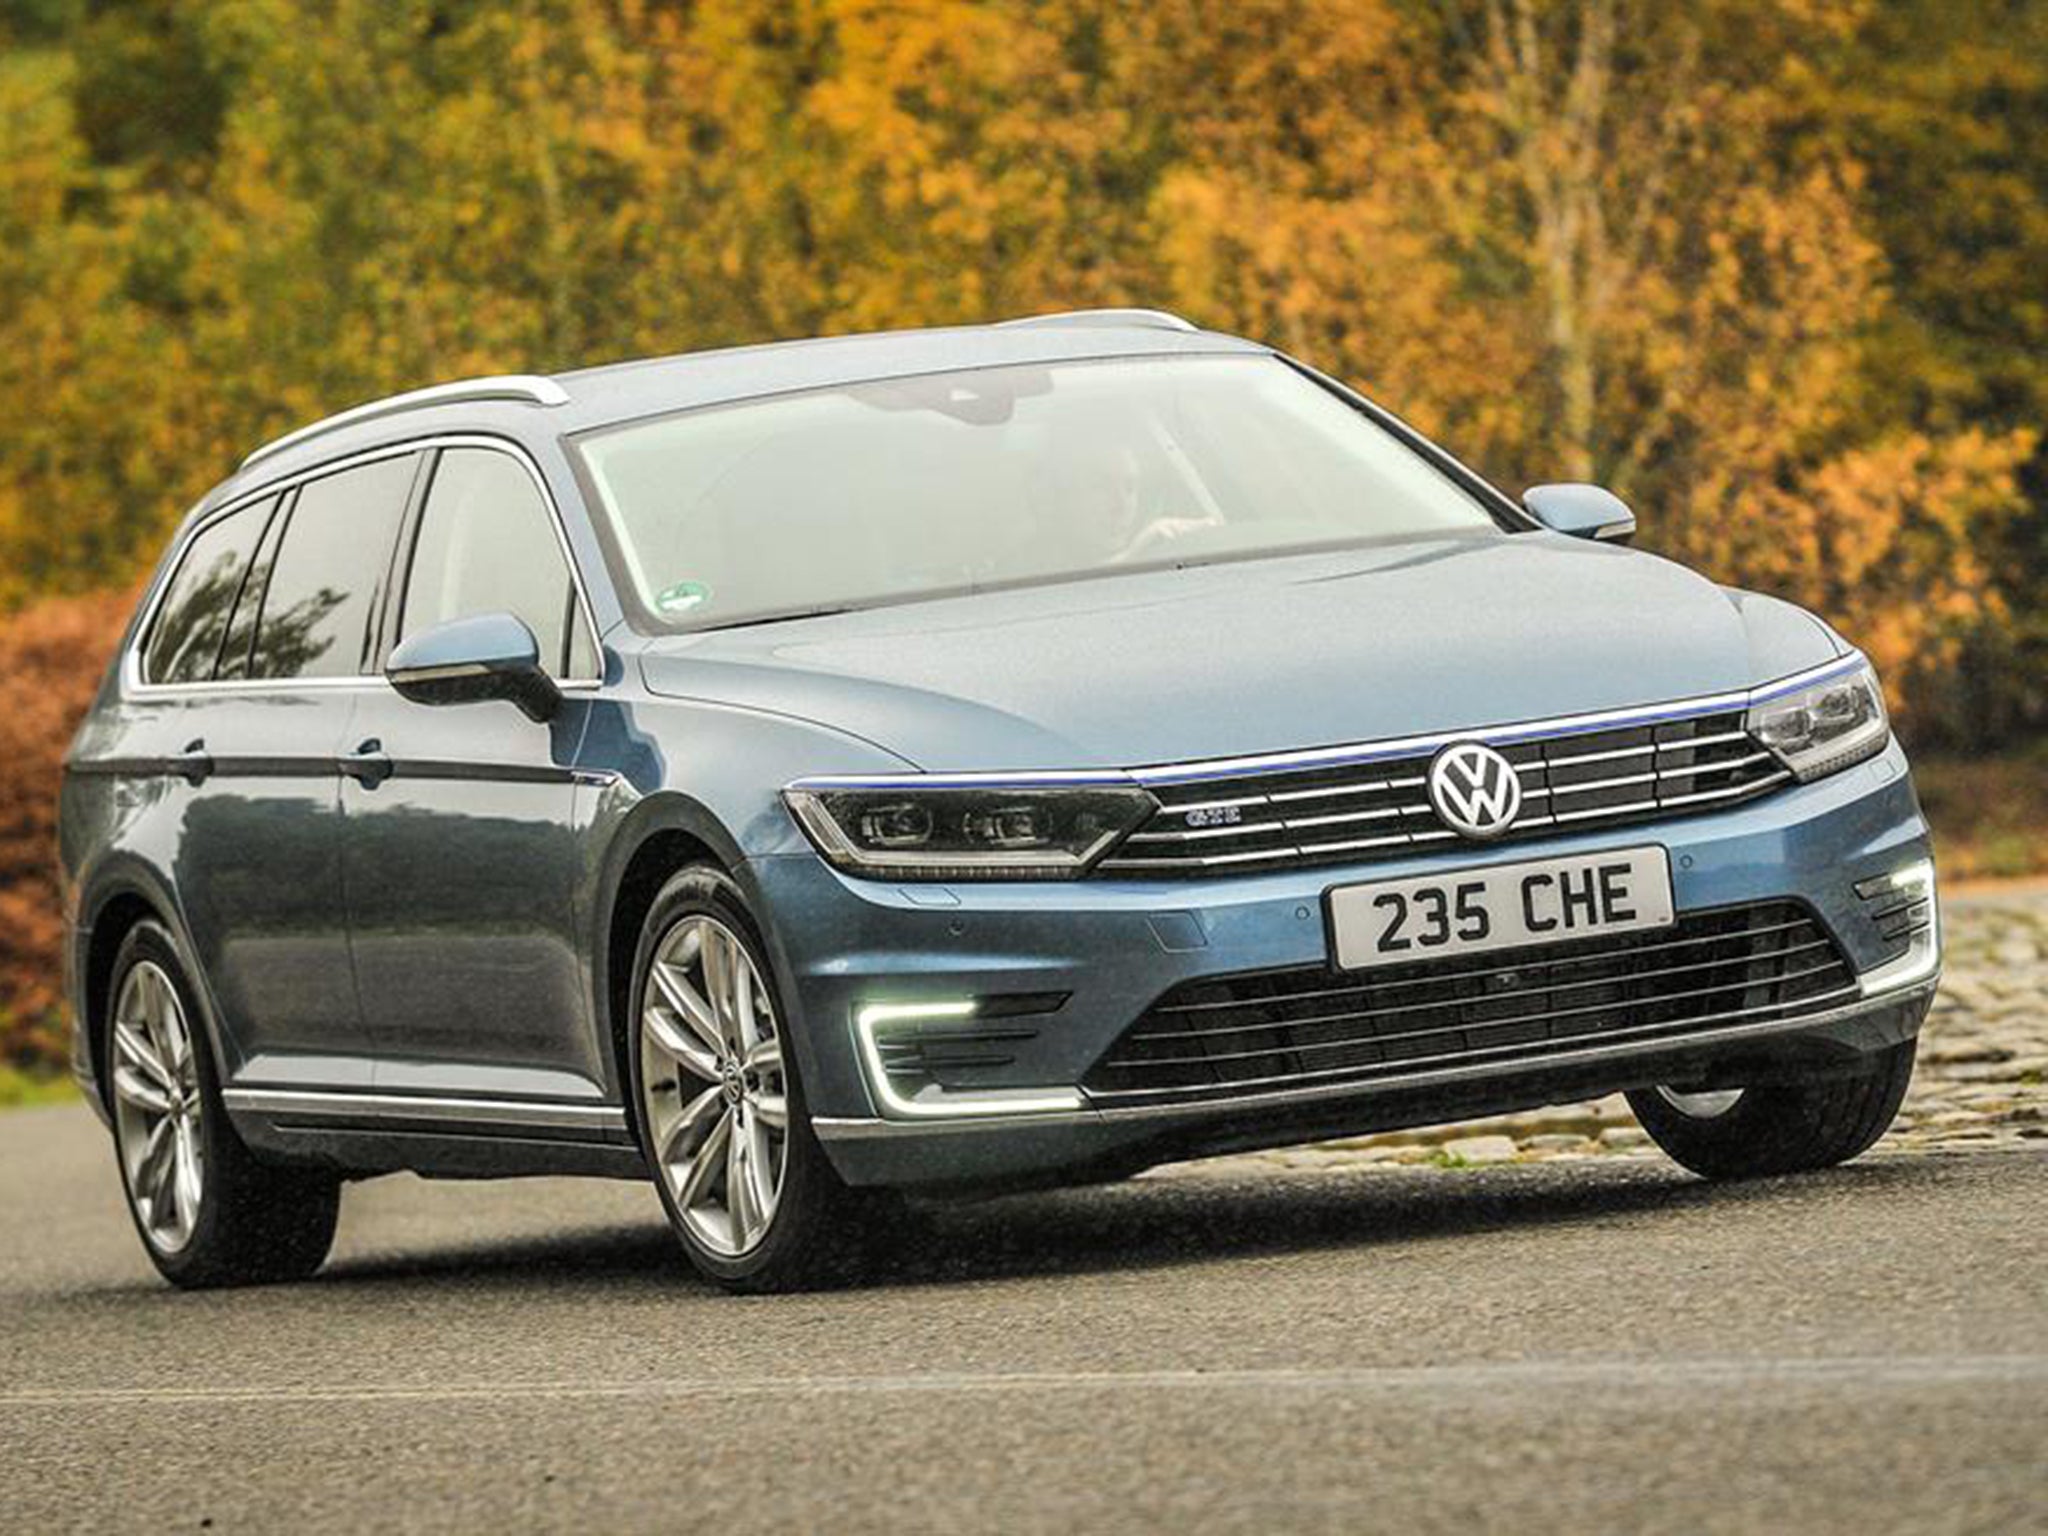 2015 Volkswagen Passat Estate GTE, car review: Expensive but just as good  as the rest of the range, The Independent